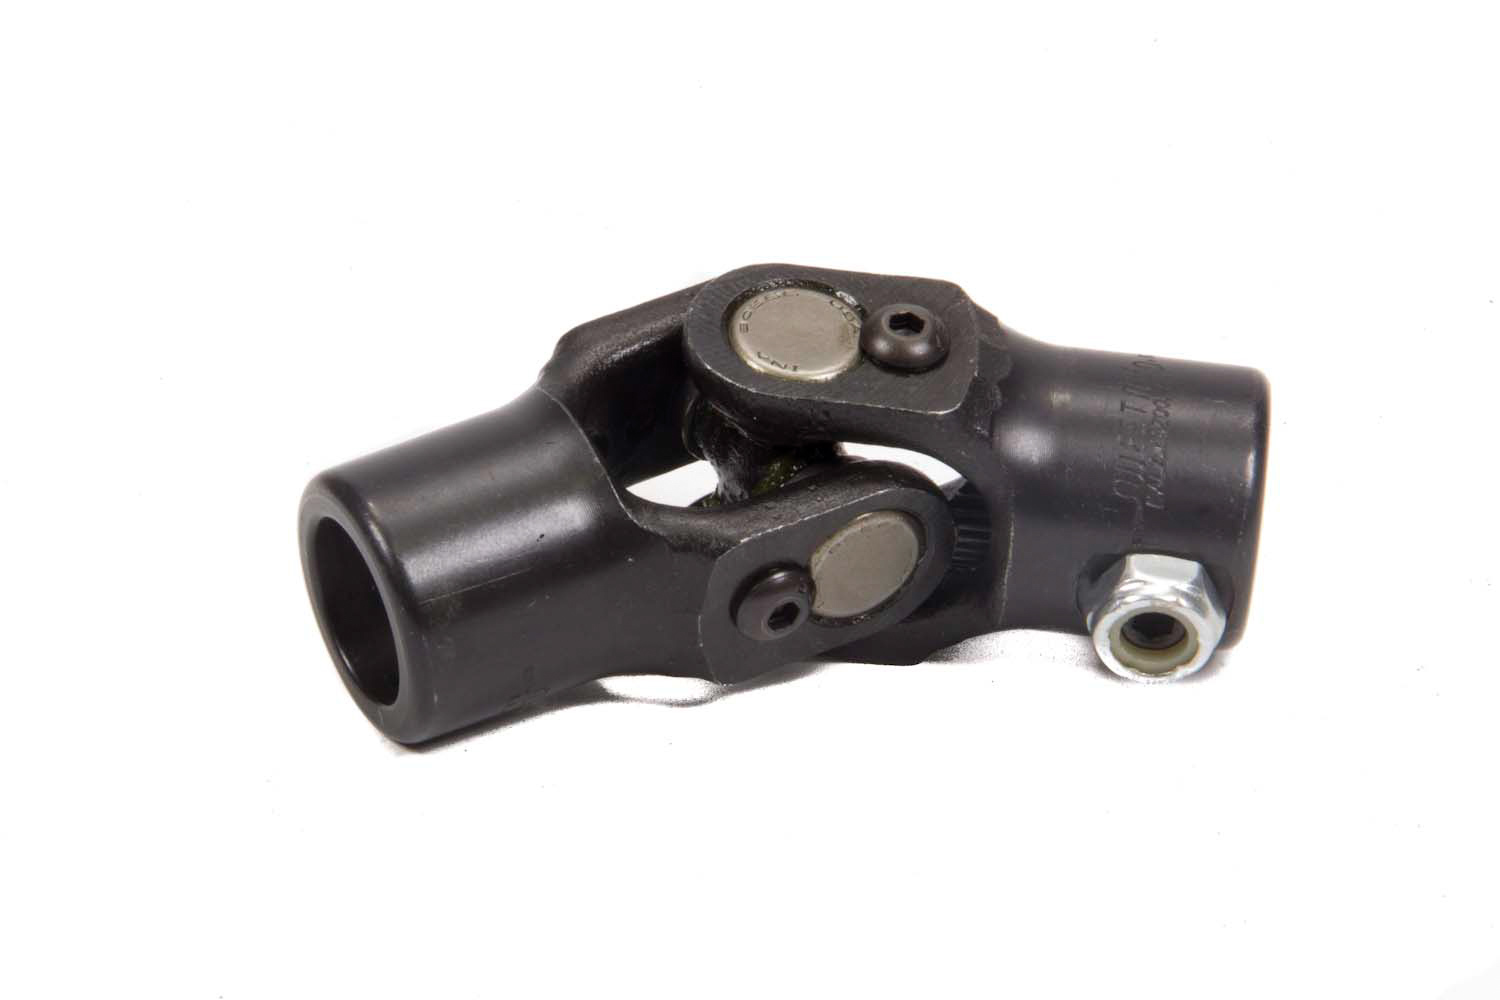 Sweet Manufacturing 401-50621 Steering Universal Joint, Single Joint, 3/4 in Smooth Bore to 3/4 in 20 Spline, Steel, Black Paint, Each